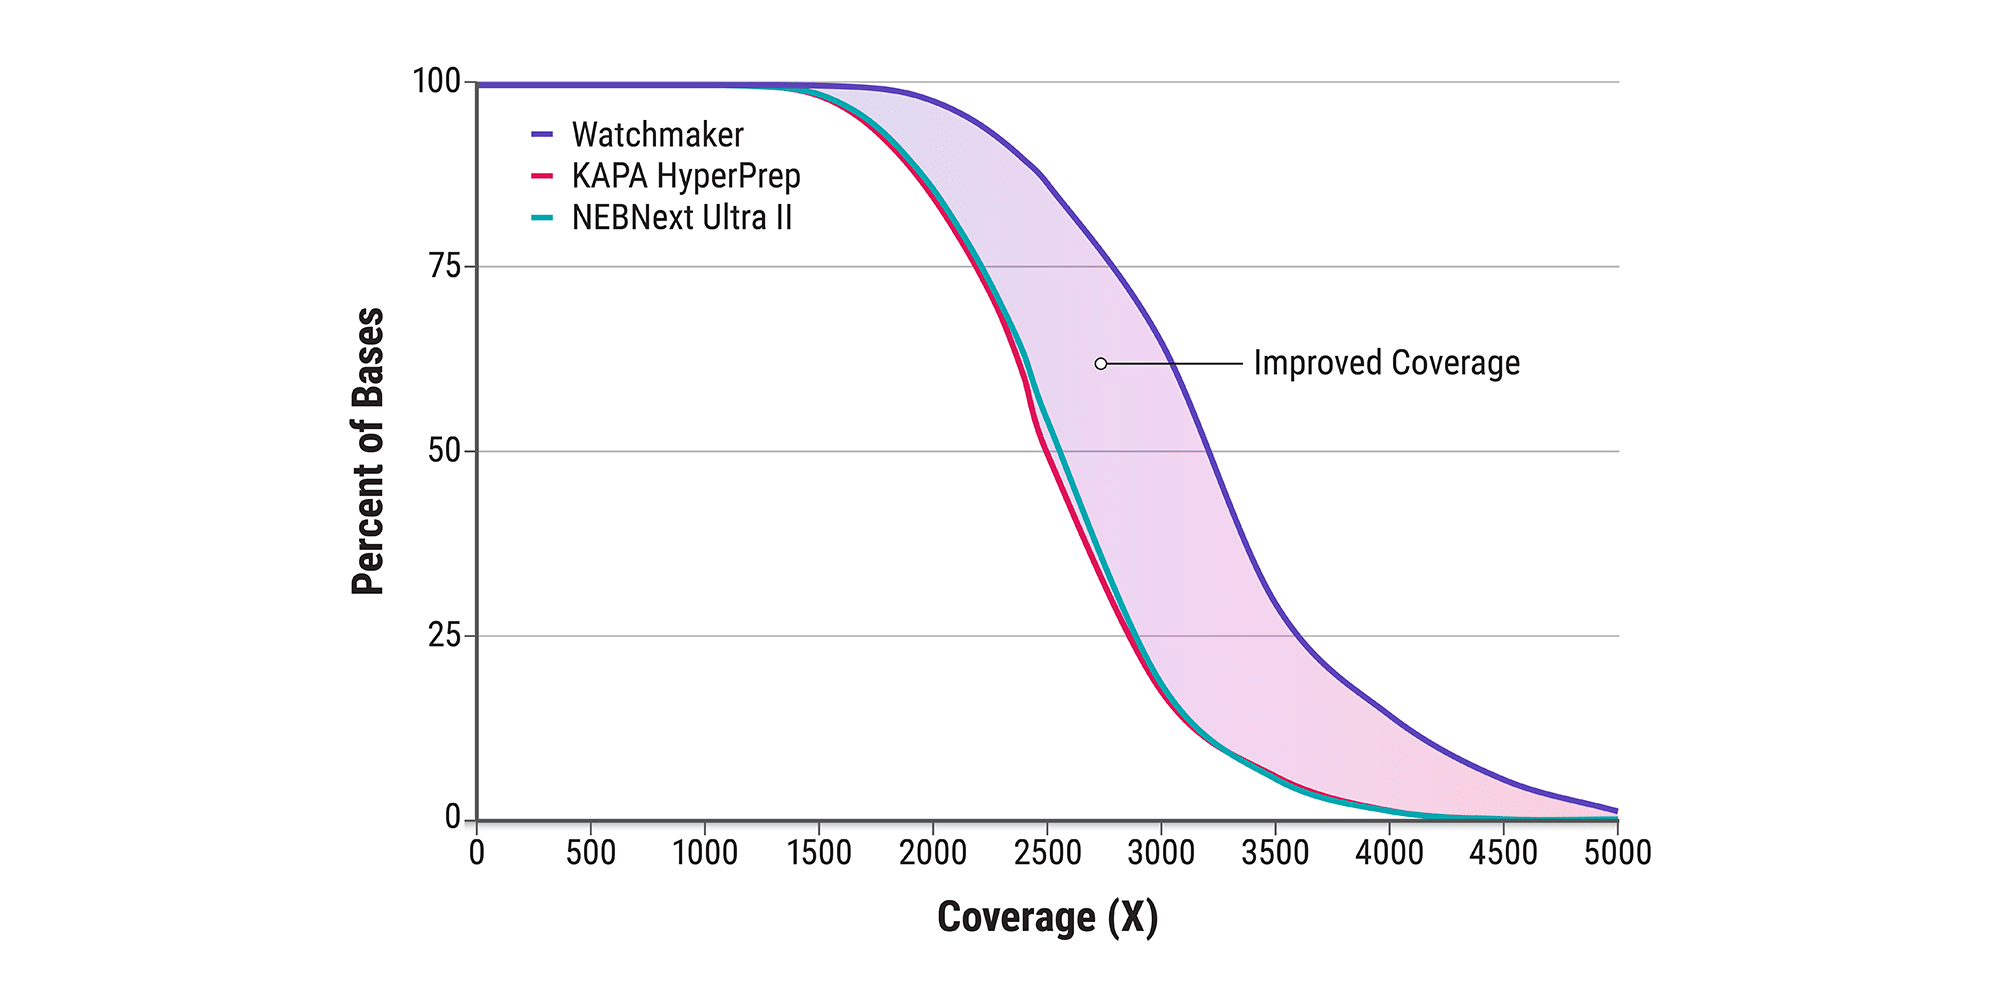 Figure 3B. Improved coverage with cfDNA. Cumulative coverage across the entire target region for 25 ng libraries, for 25 million randomly sampled read pairs per library. The shaded region indicates improved coverage of the Watchmaker libraries in comparison to other vendors.